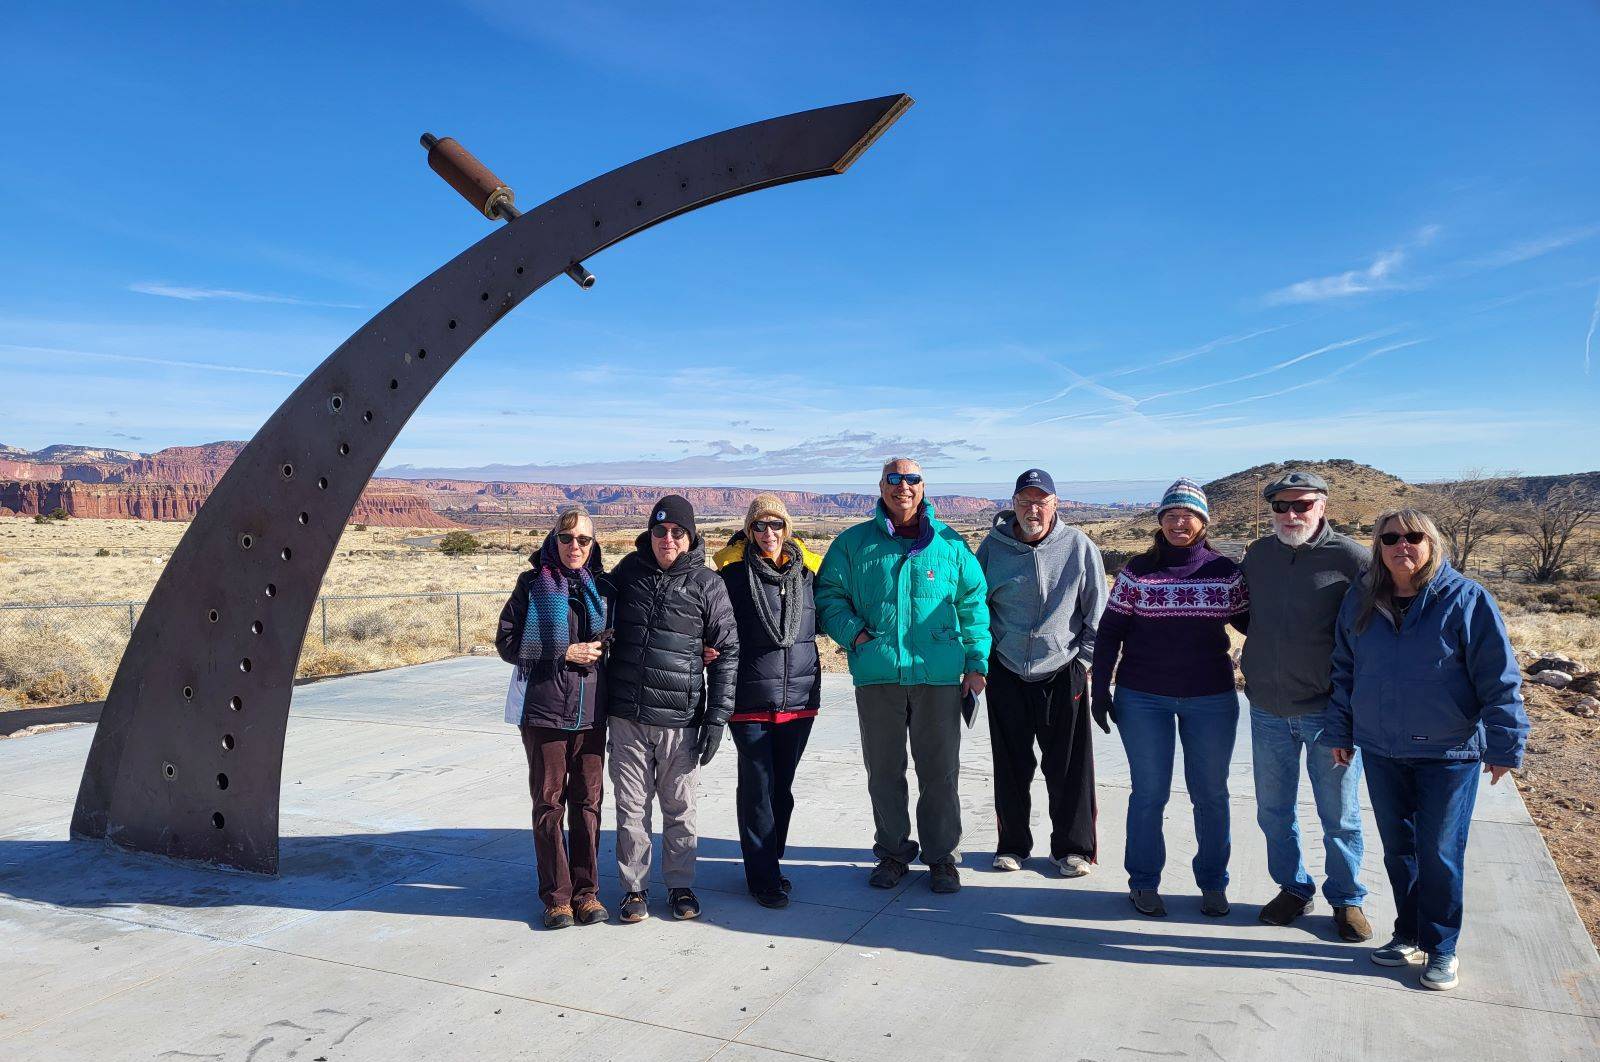 The Winter Solstice group at solar noon under the solar fin. Barb Walkush and Gary Pankow third and fourth from the left.